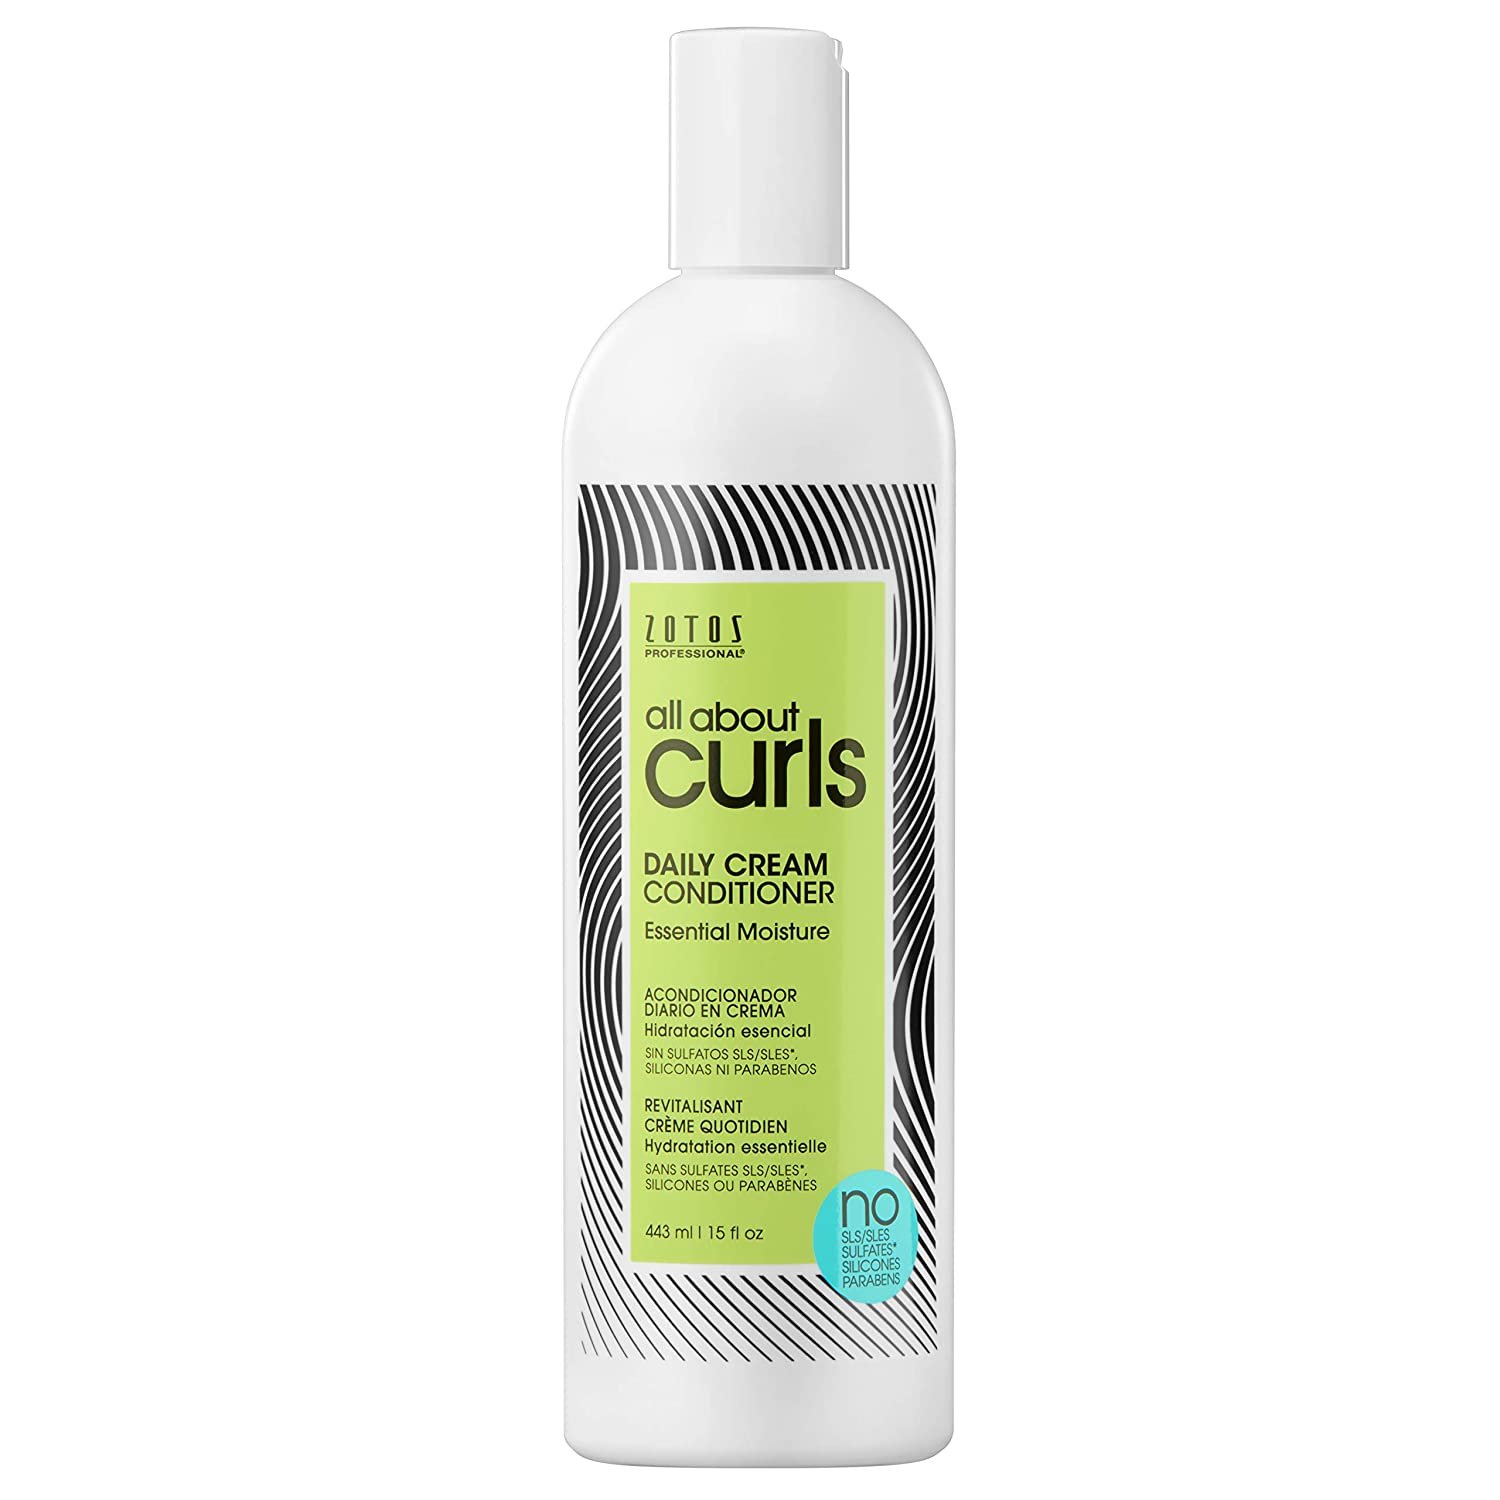 Zotos All About Curls Daily Cream Conditioner